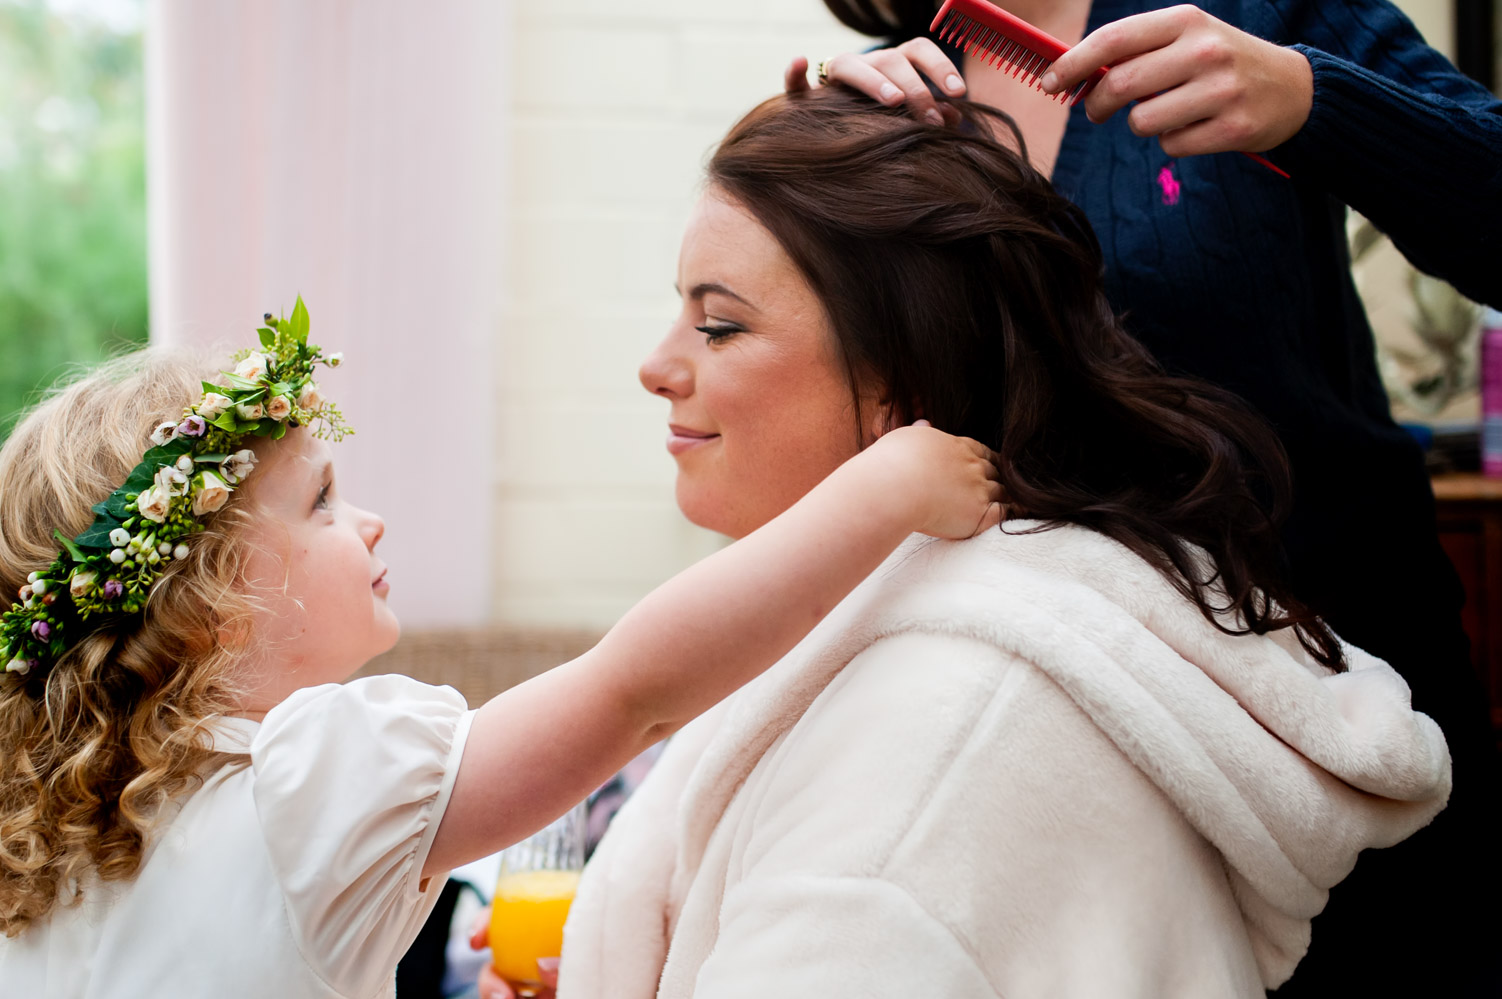 Child smiling at bride getting ready